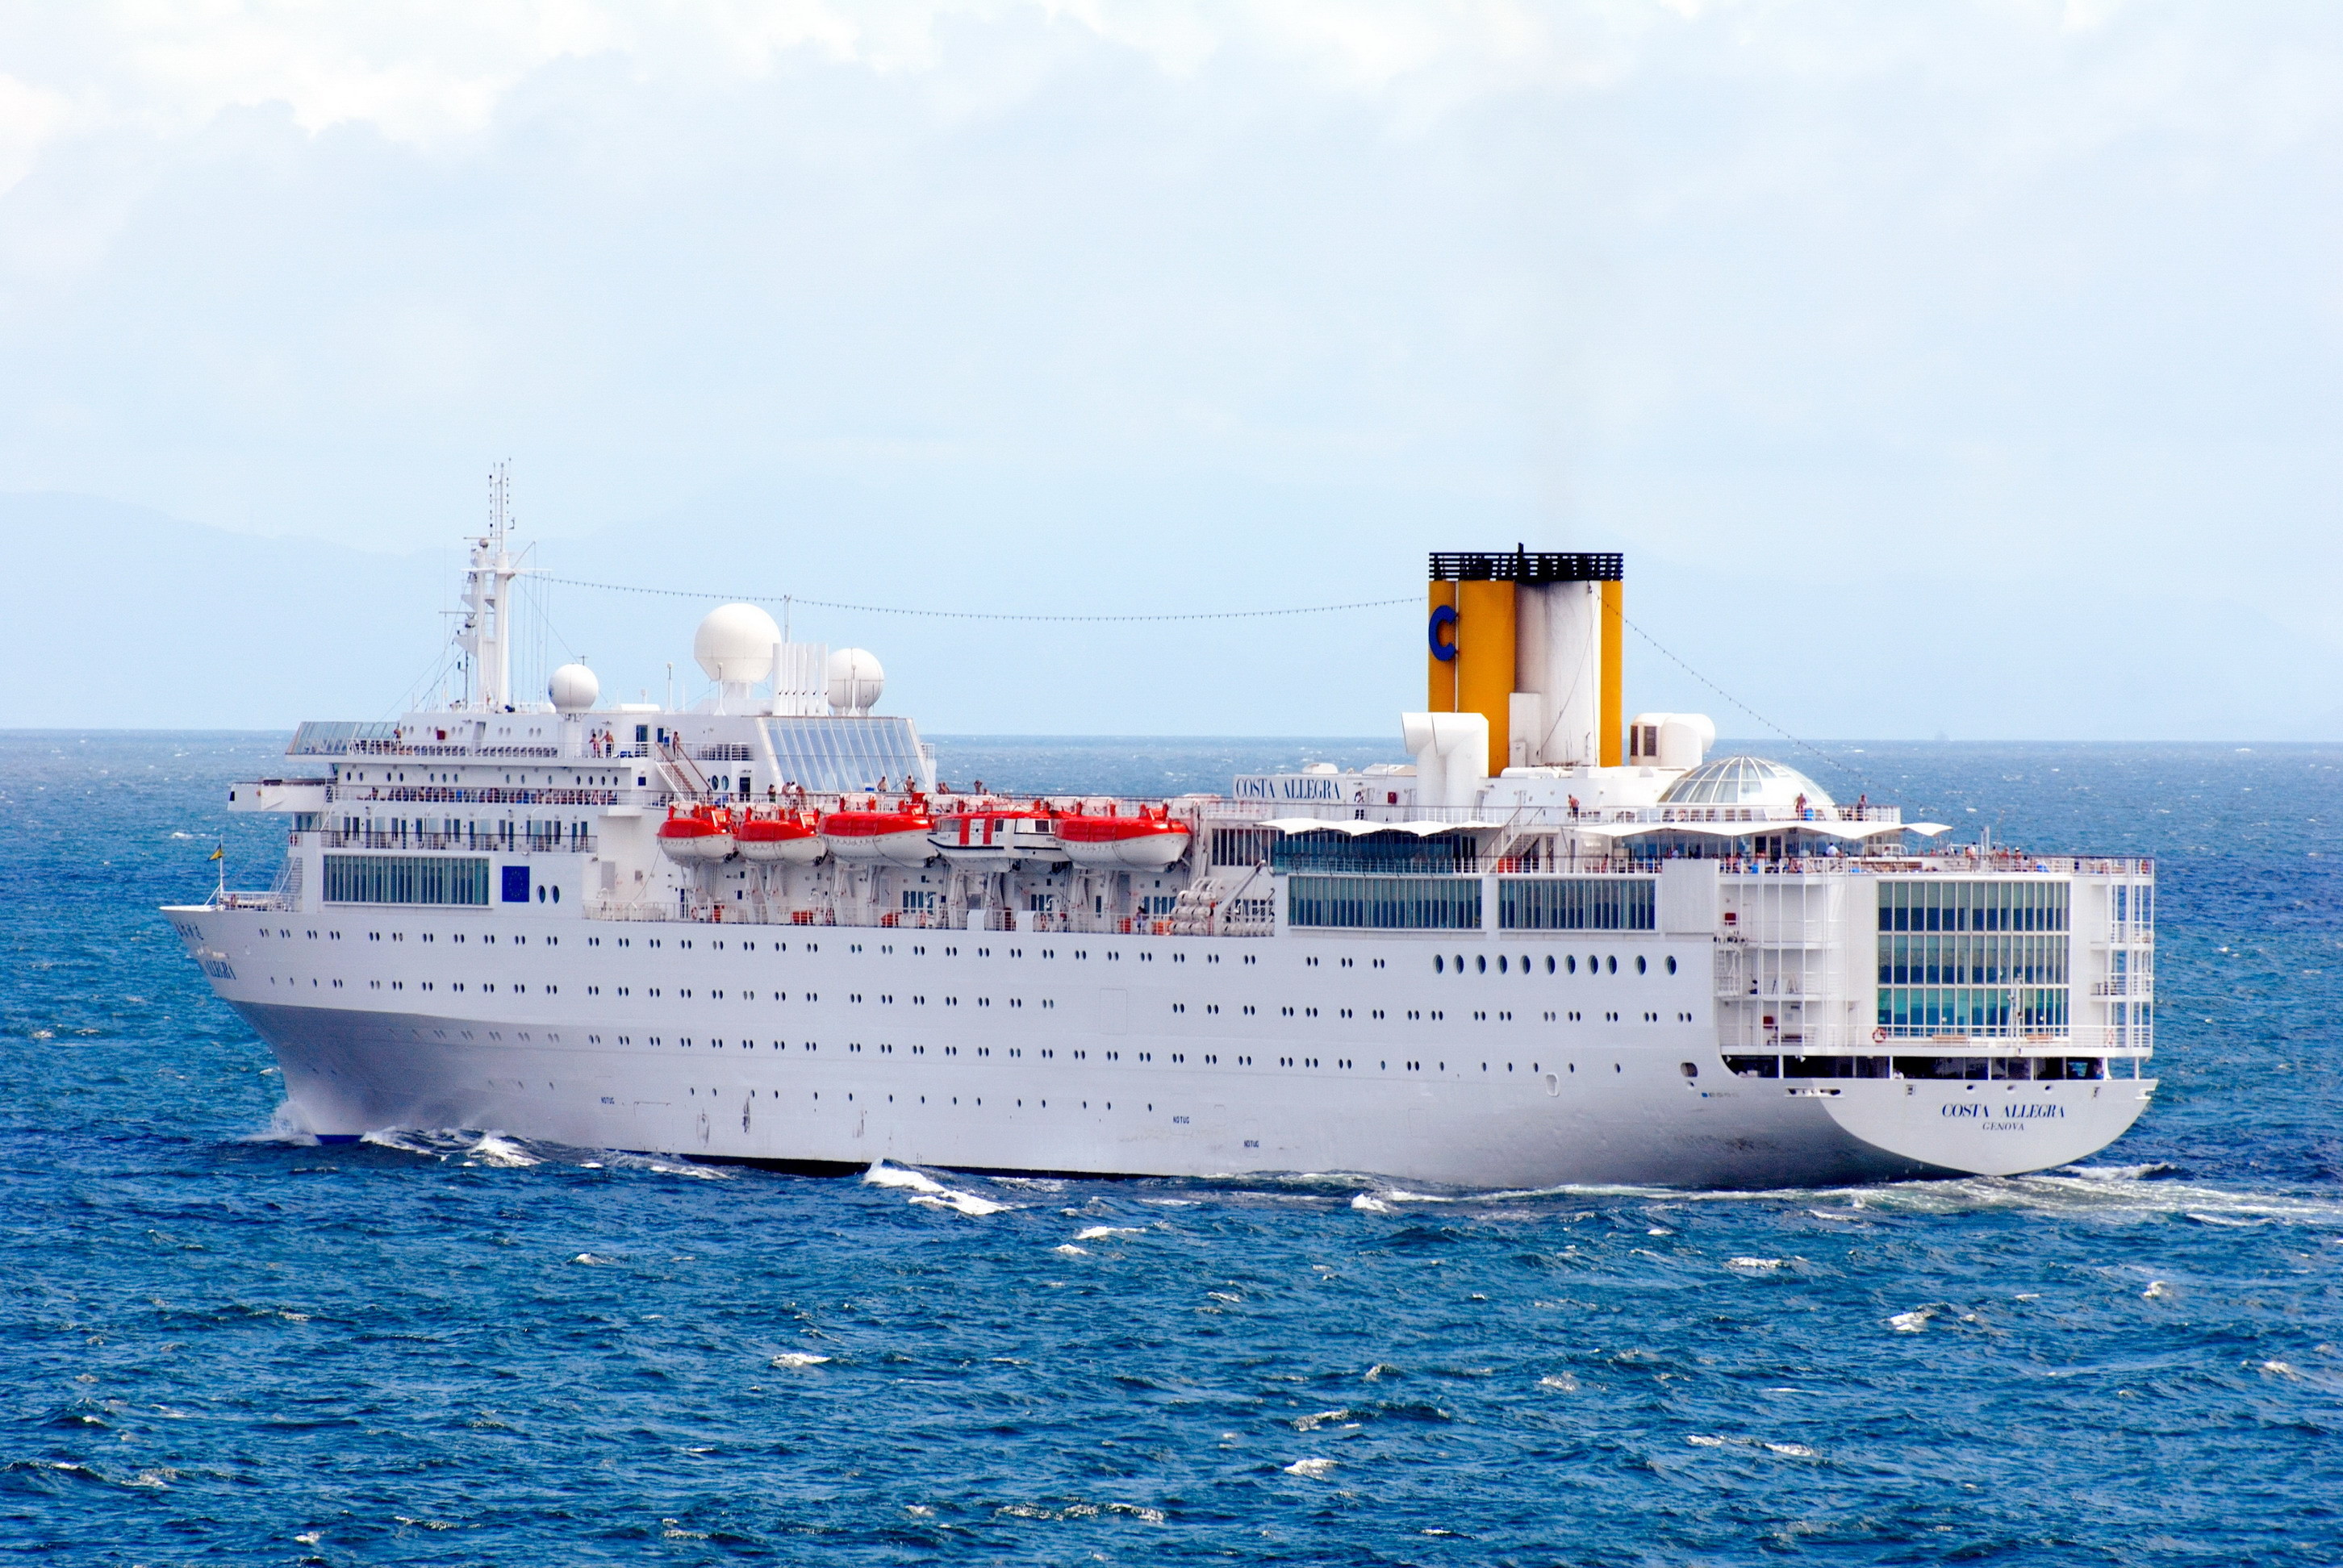 A still image taken from a video footage shows the Costa Allegra 